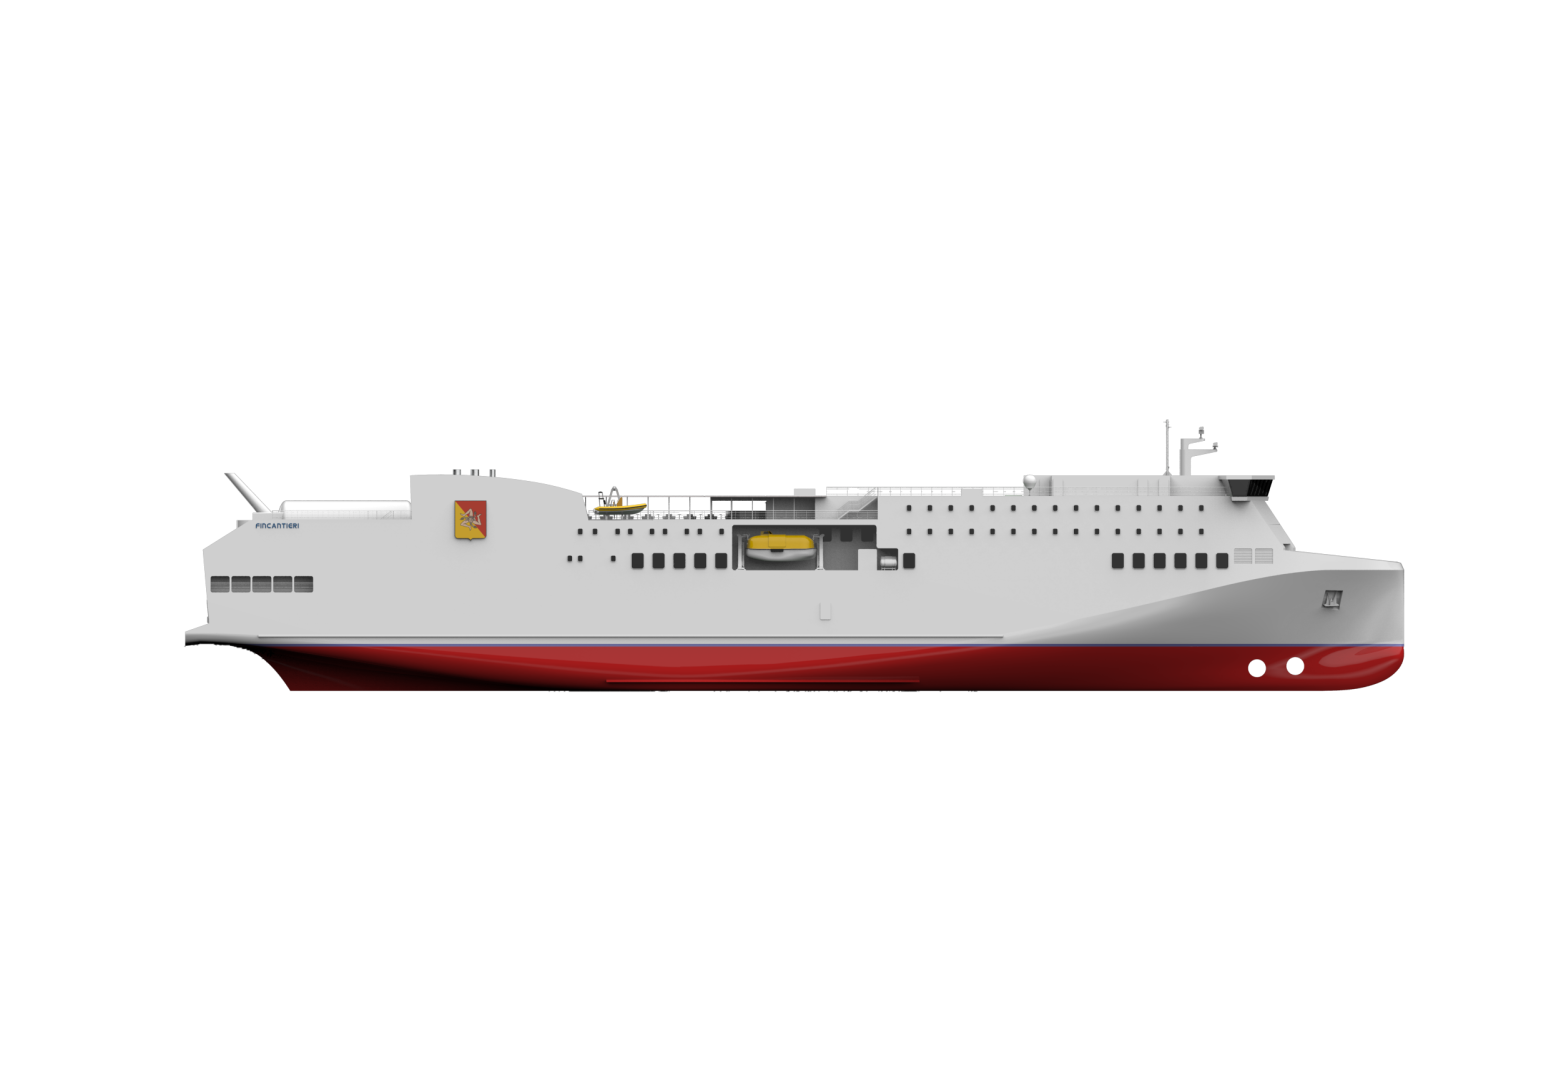 Cily-Fincantieri contract for new ferry